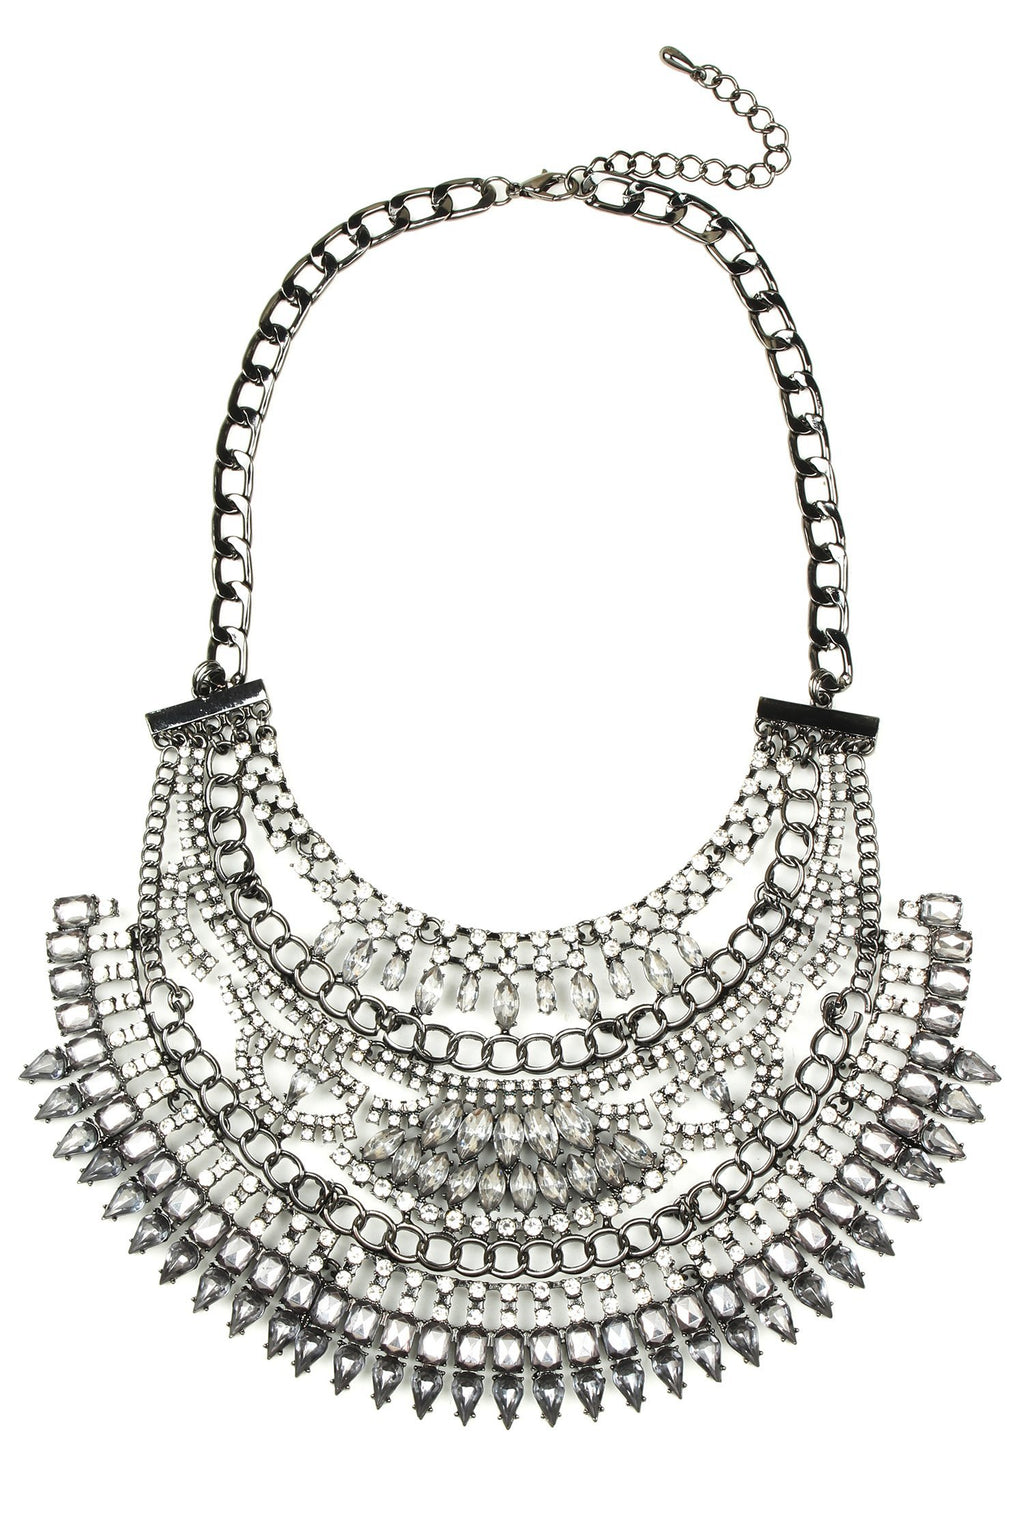 Silver layered necklace approximately 14 inches in length. This piece is adorned with faceted crystals and conveys a Victorian gothic style.